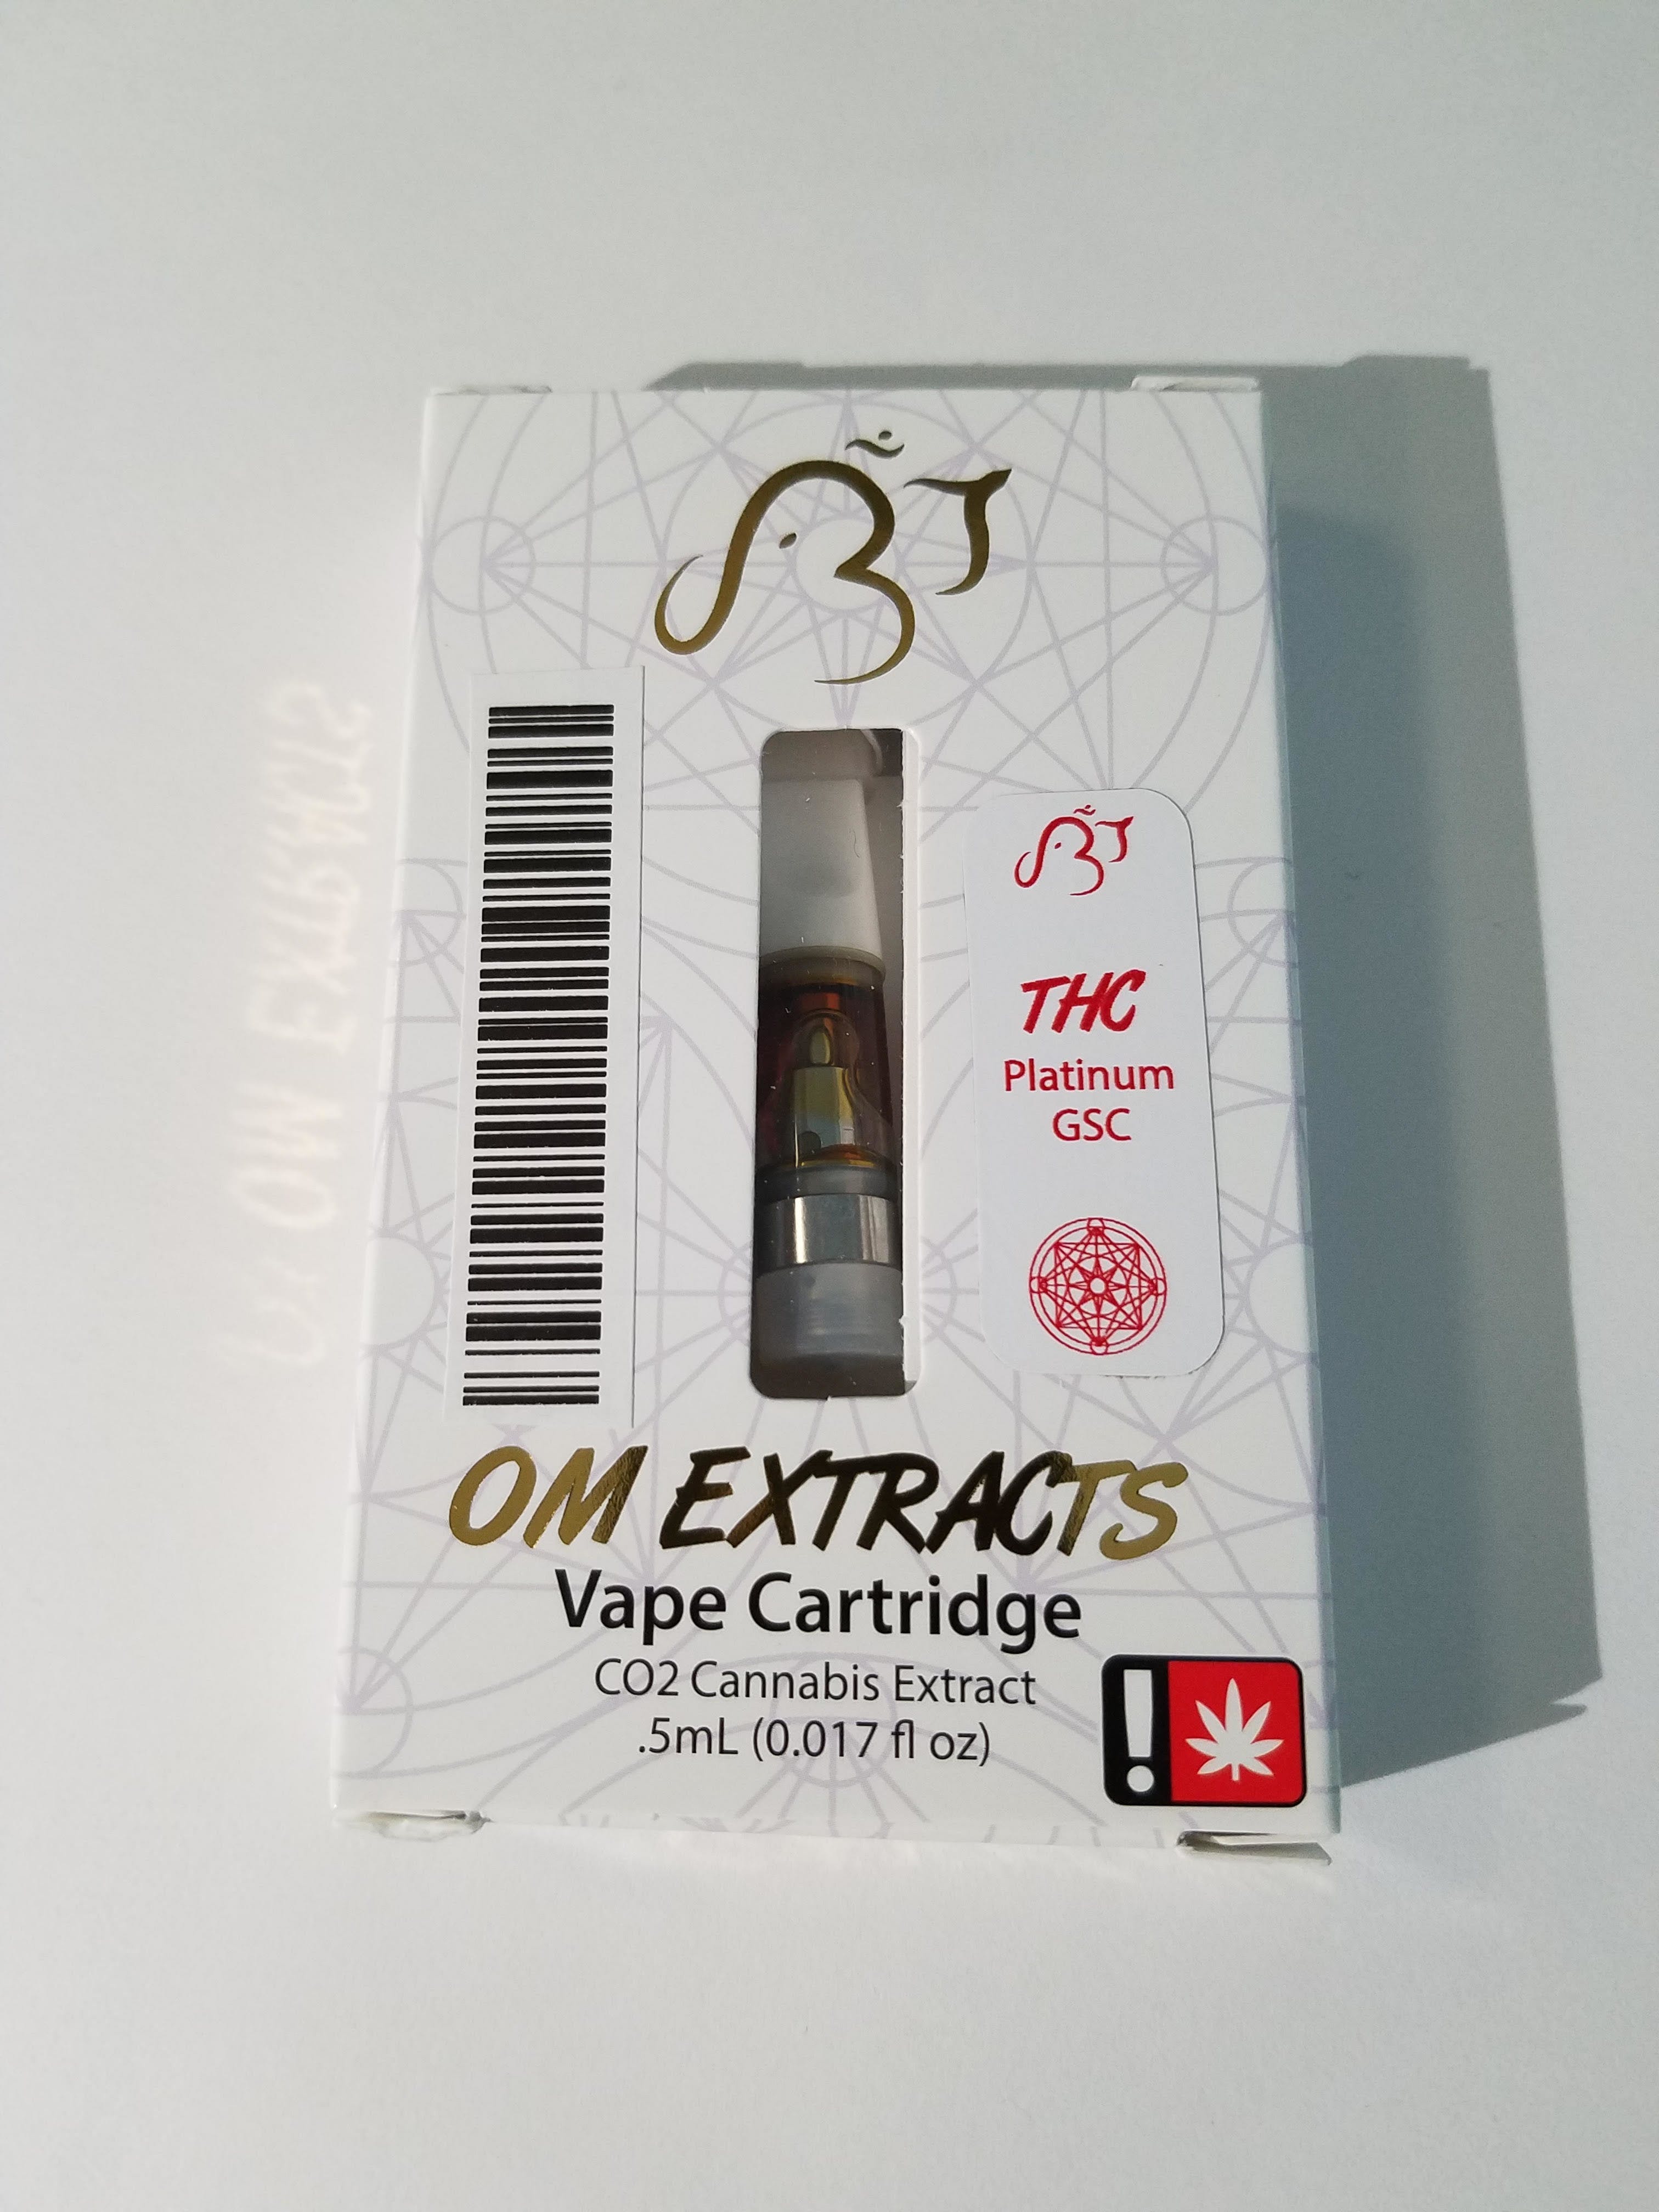 concentrate-5g-platinum-gsc-co2-cartridge-om-extracts